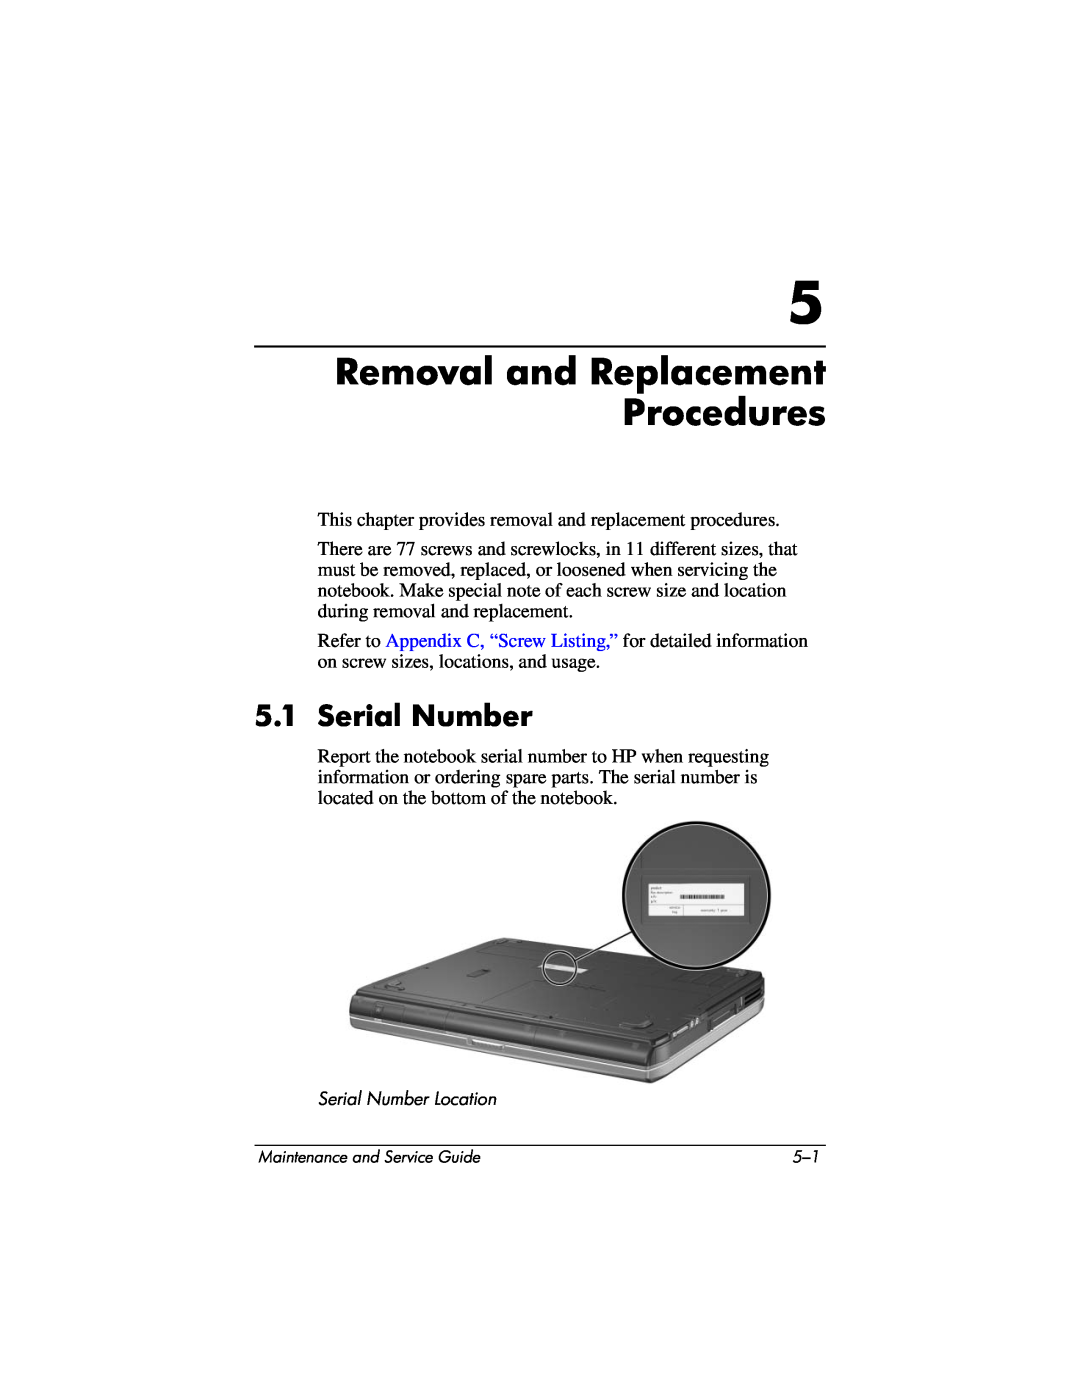 HP NX9040, NX9030, NX9020, ZE4900 manual Removal and Replacement Procedures, Serial Number 